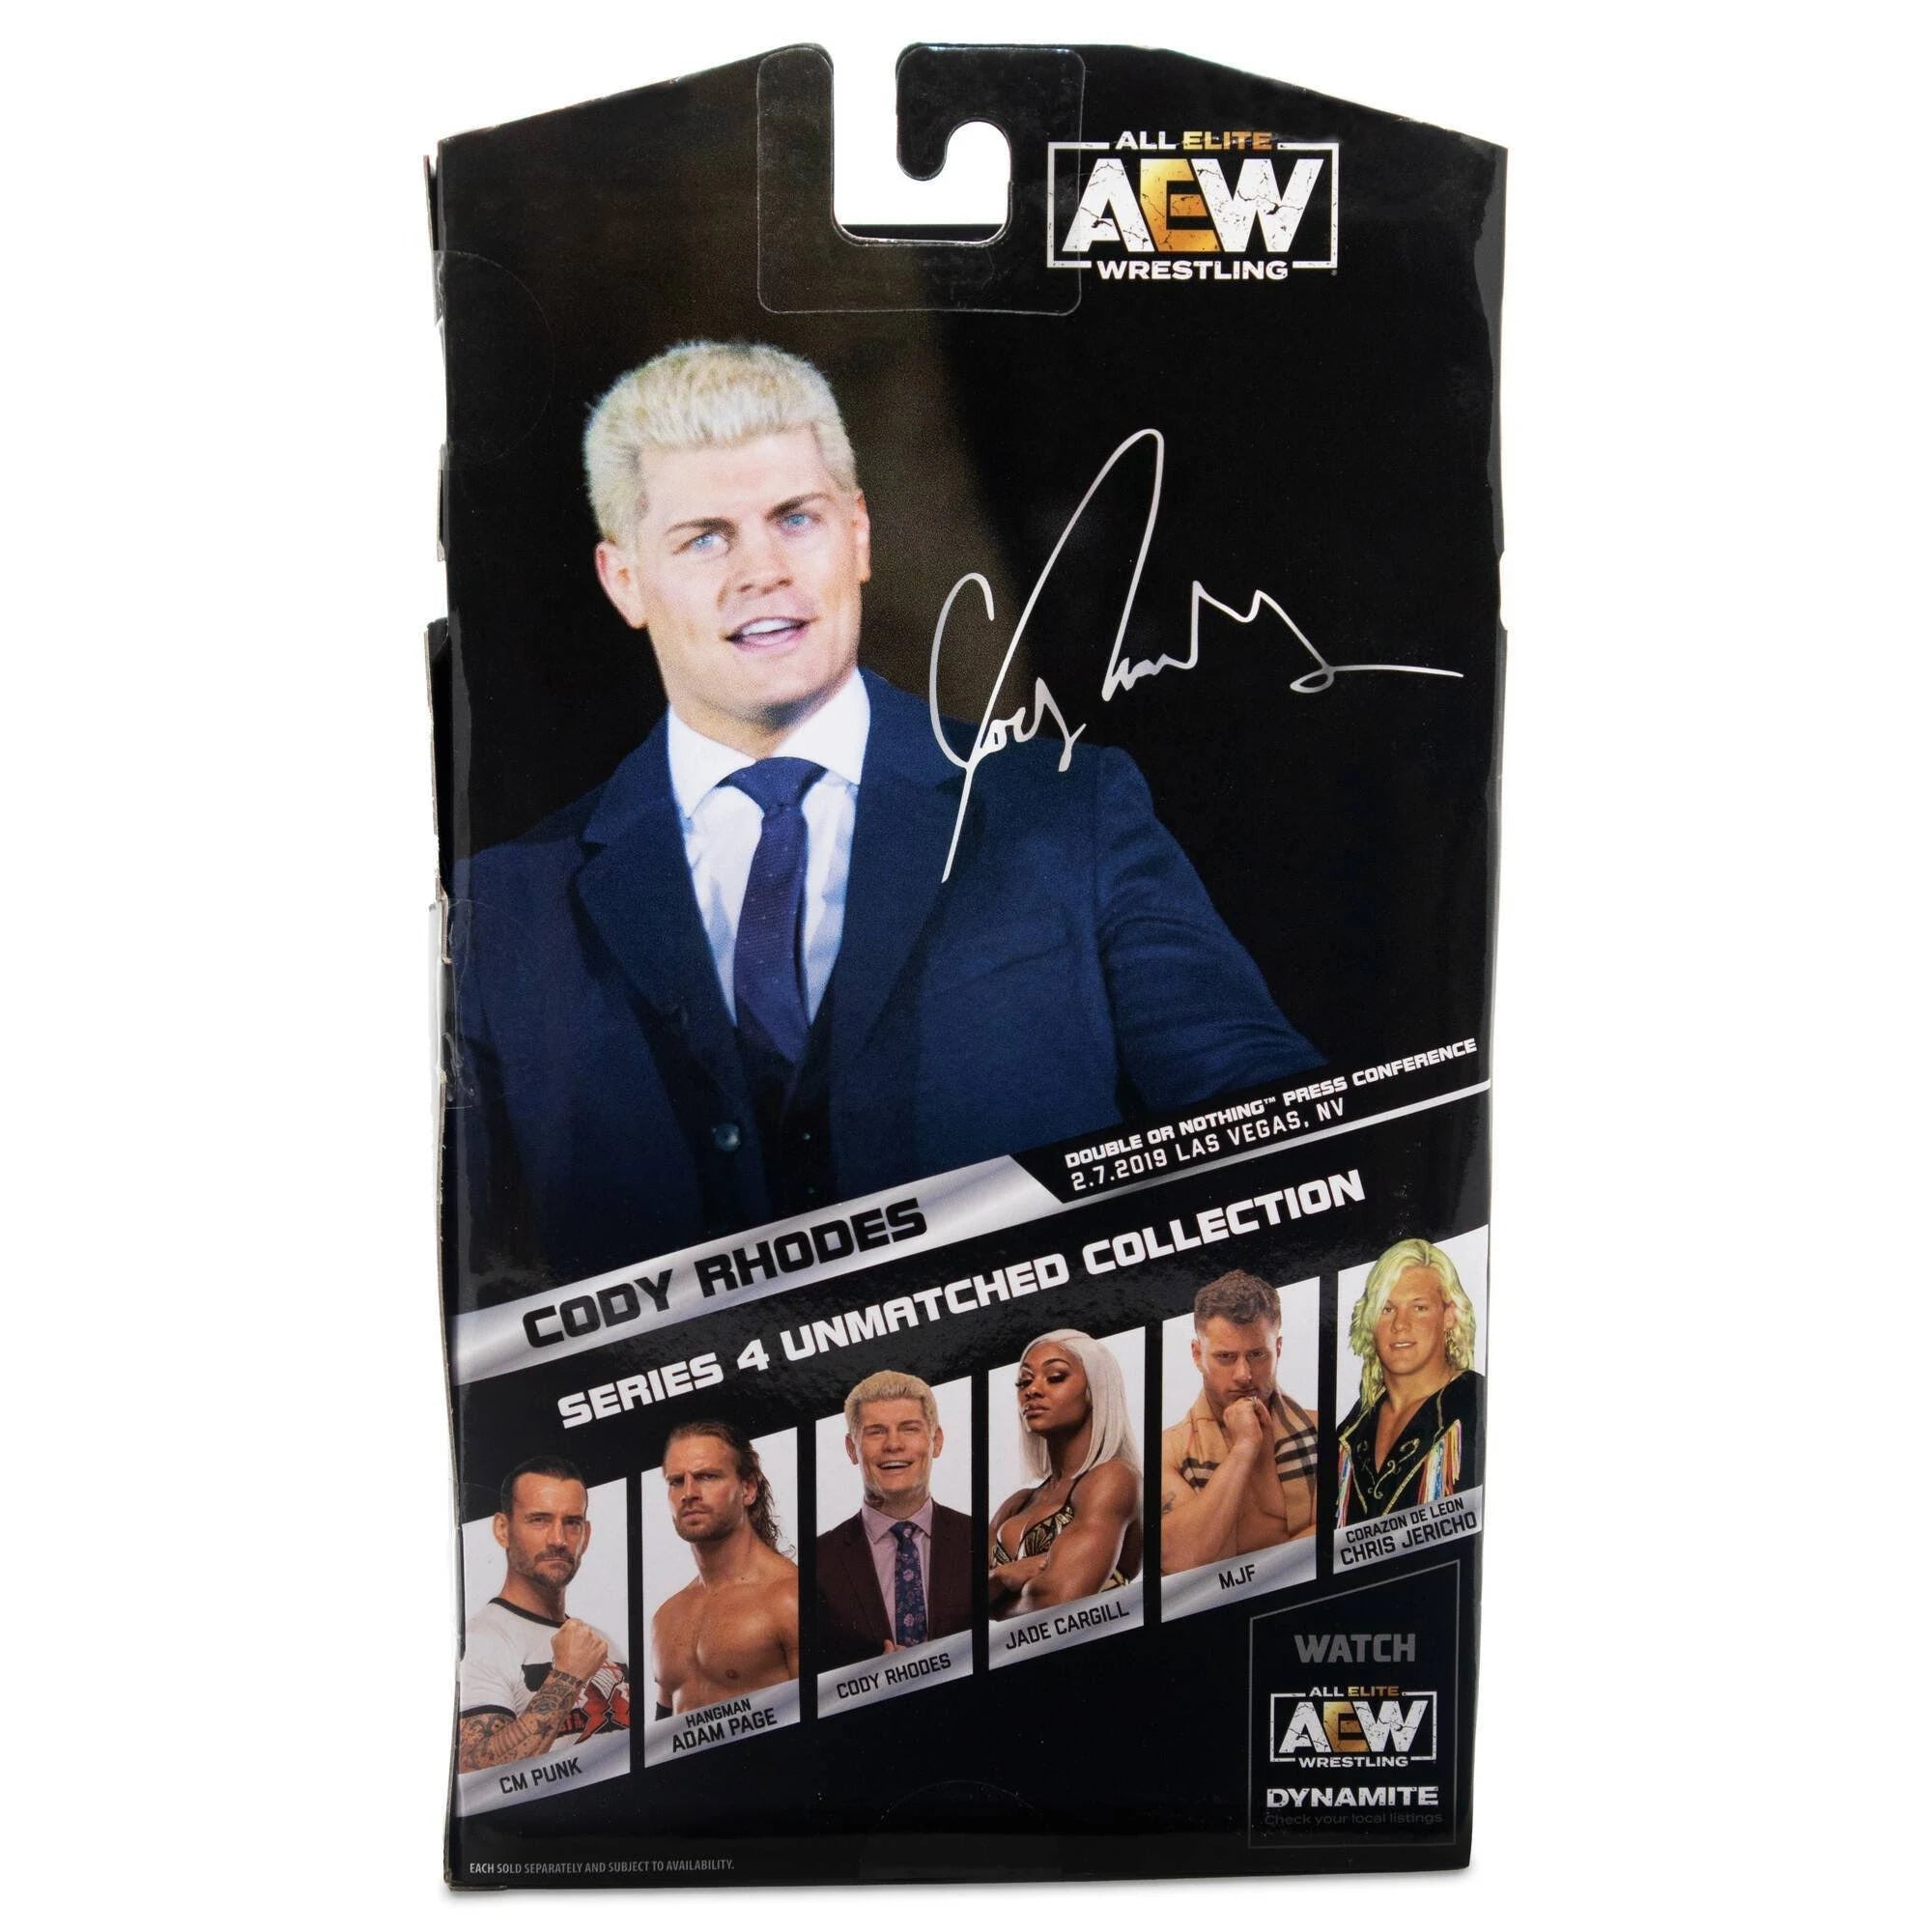 AEW Unmatched Wave 4 Cody Rhodes